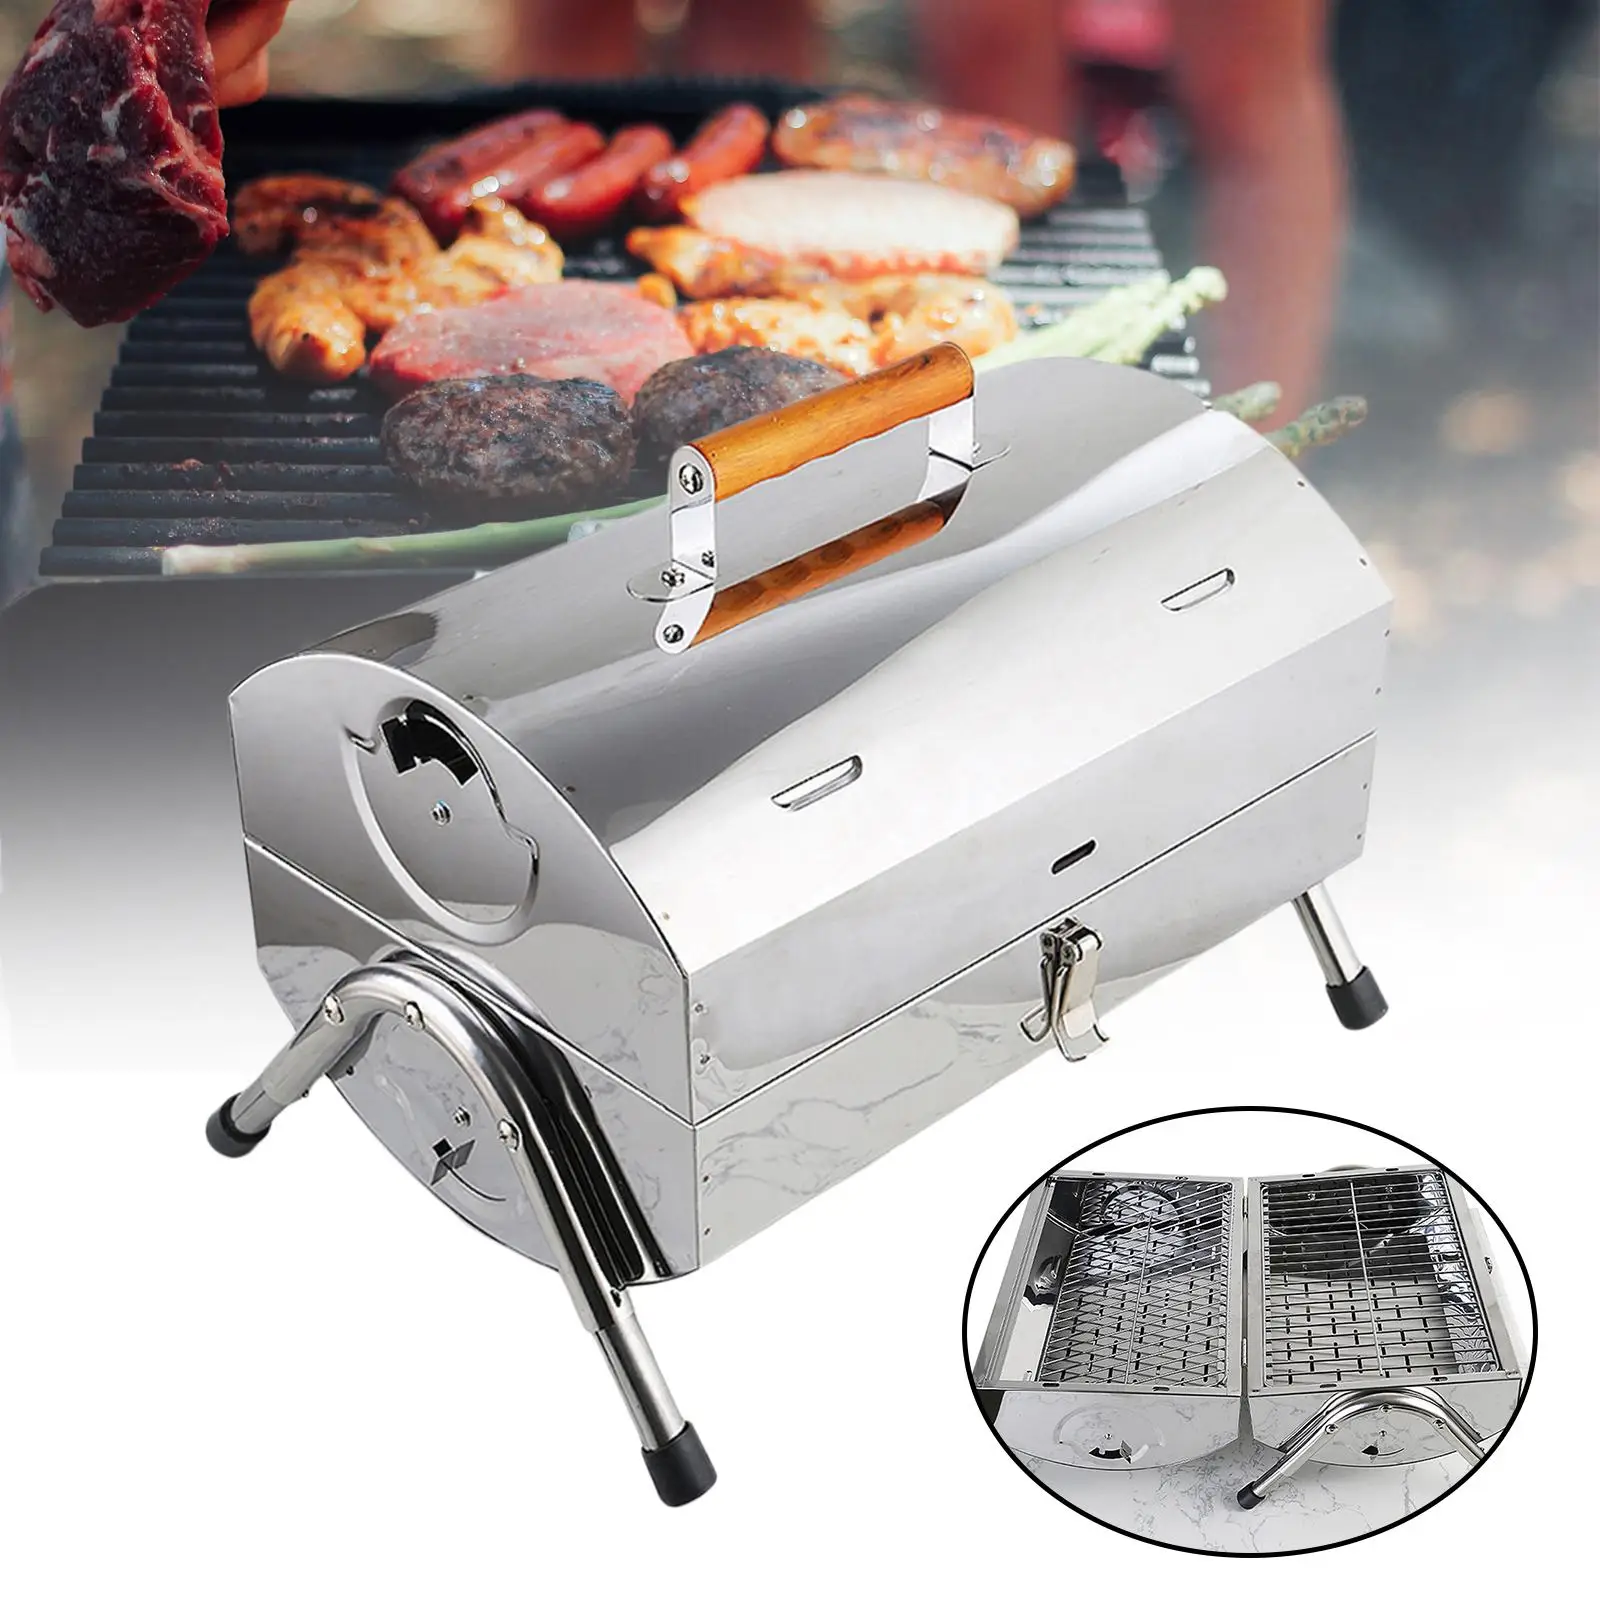 Tabletop Charcoal Grill Household Grilling Meat Multifunctional Mini Camping Grill for Beach RV Traveling Garden Hiking Backyard